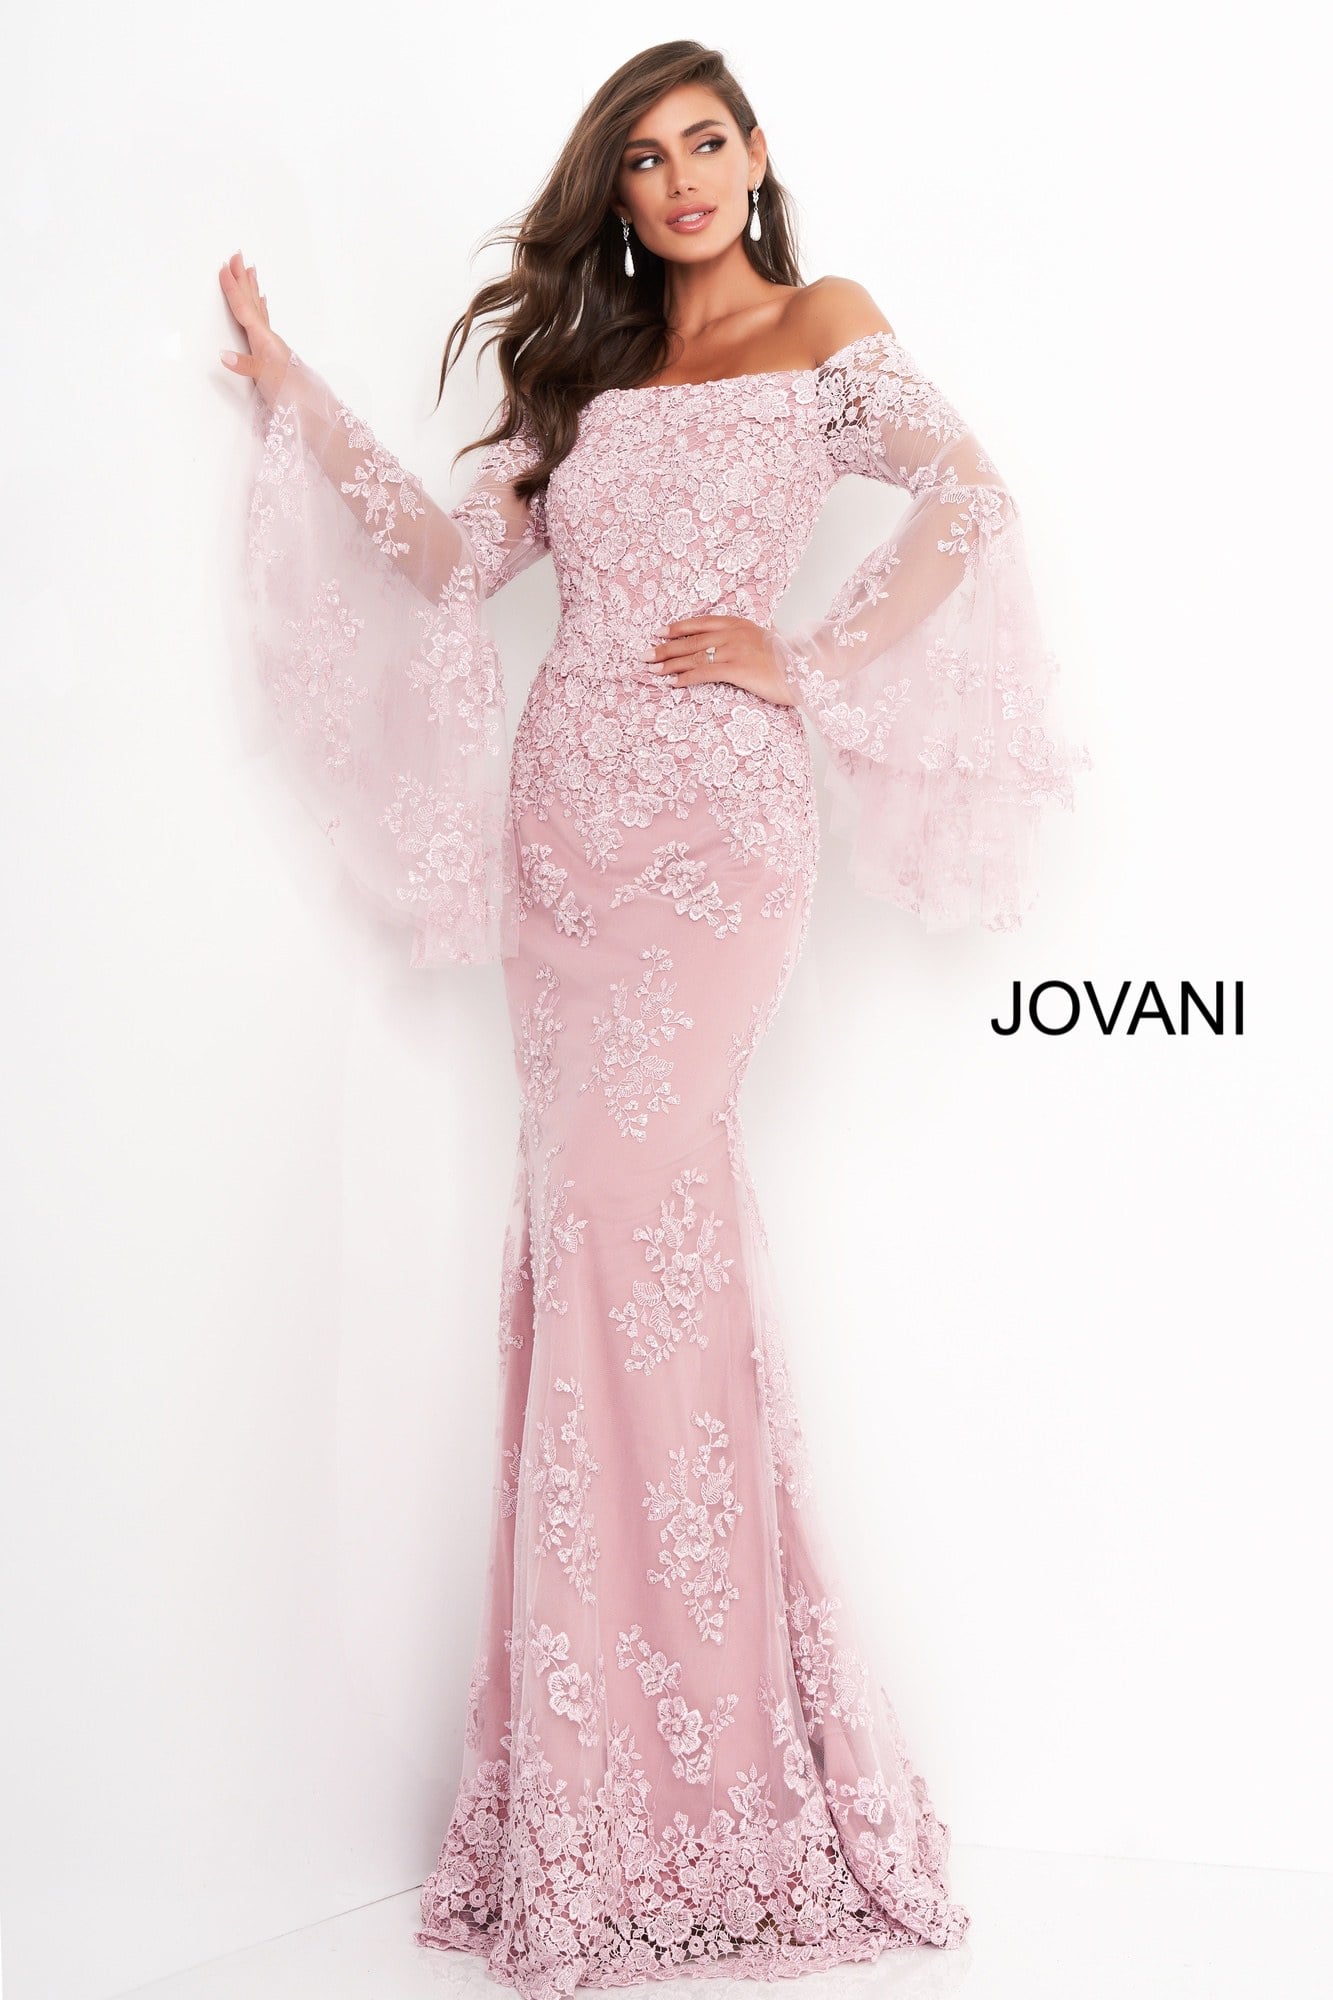 Jovani 02570 Pink Floral Embroidered Sheath Mother Of The Bride Dress